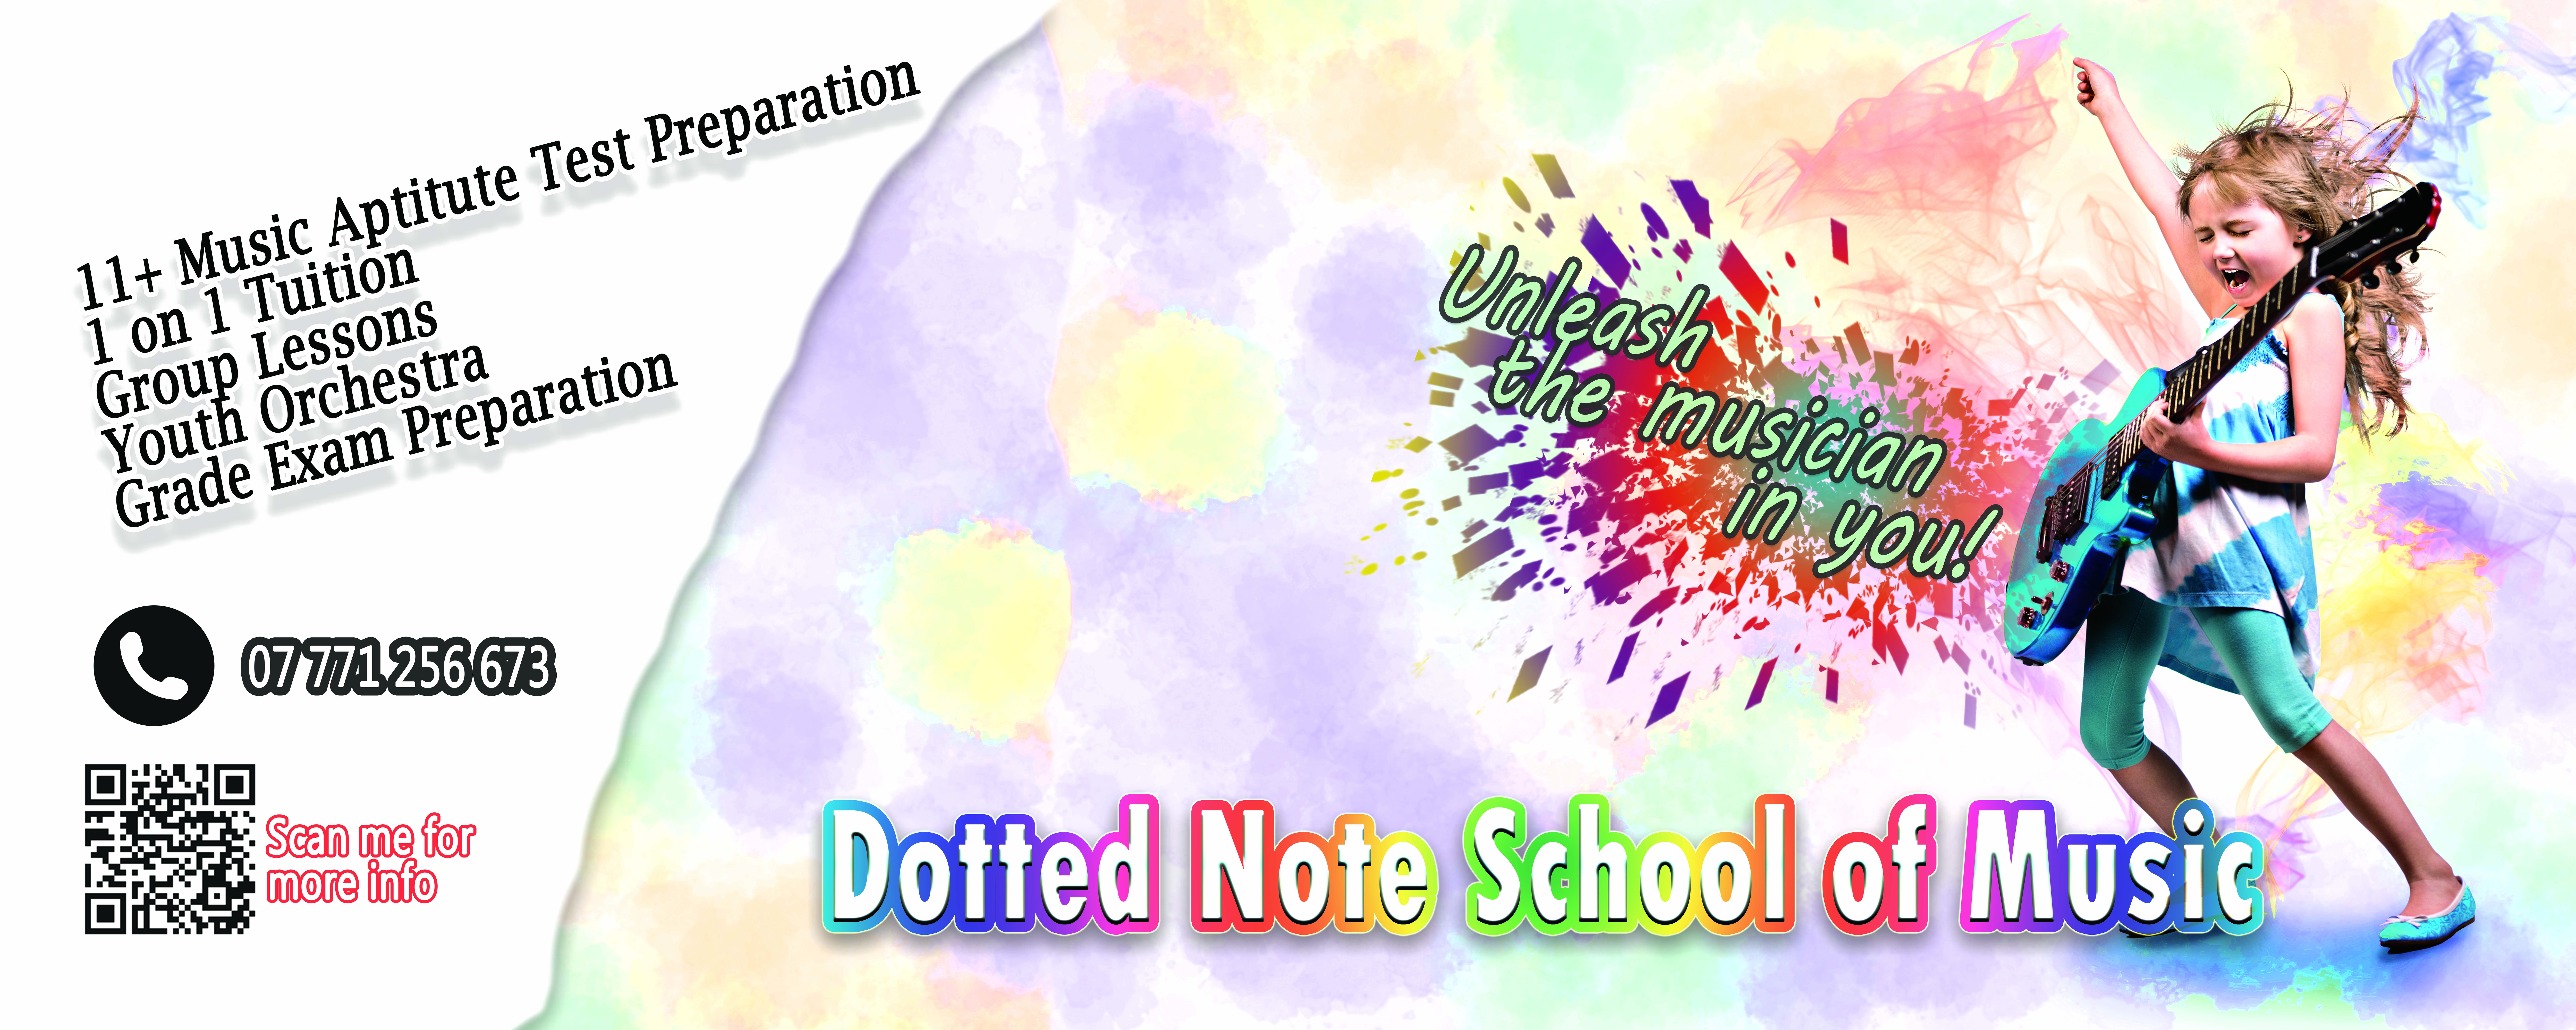 Dotted Note School of Music